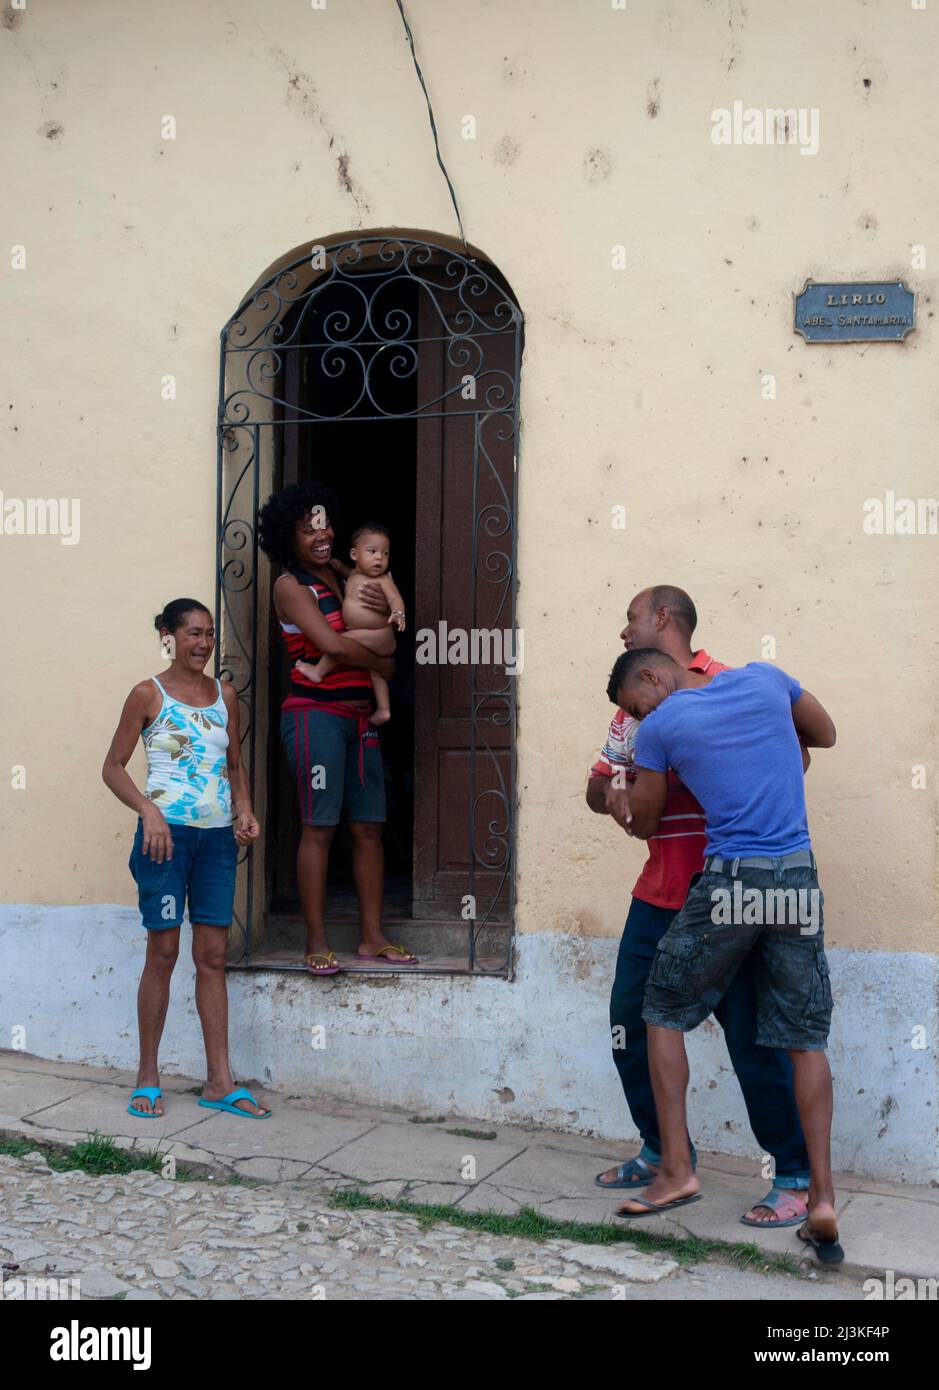 Family laughing and playing in the street in Trinidad, Cuba. Stock Photo